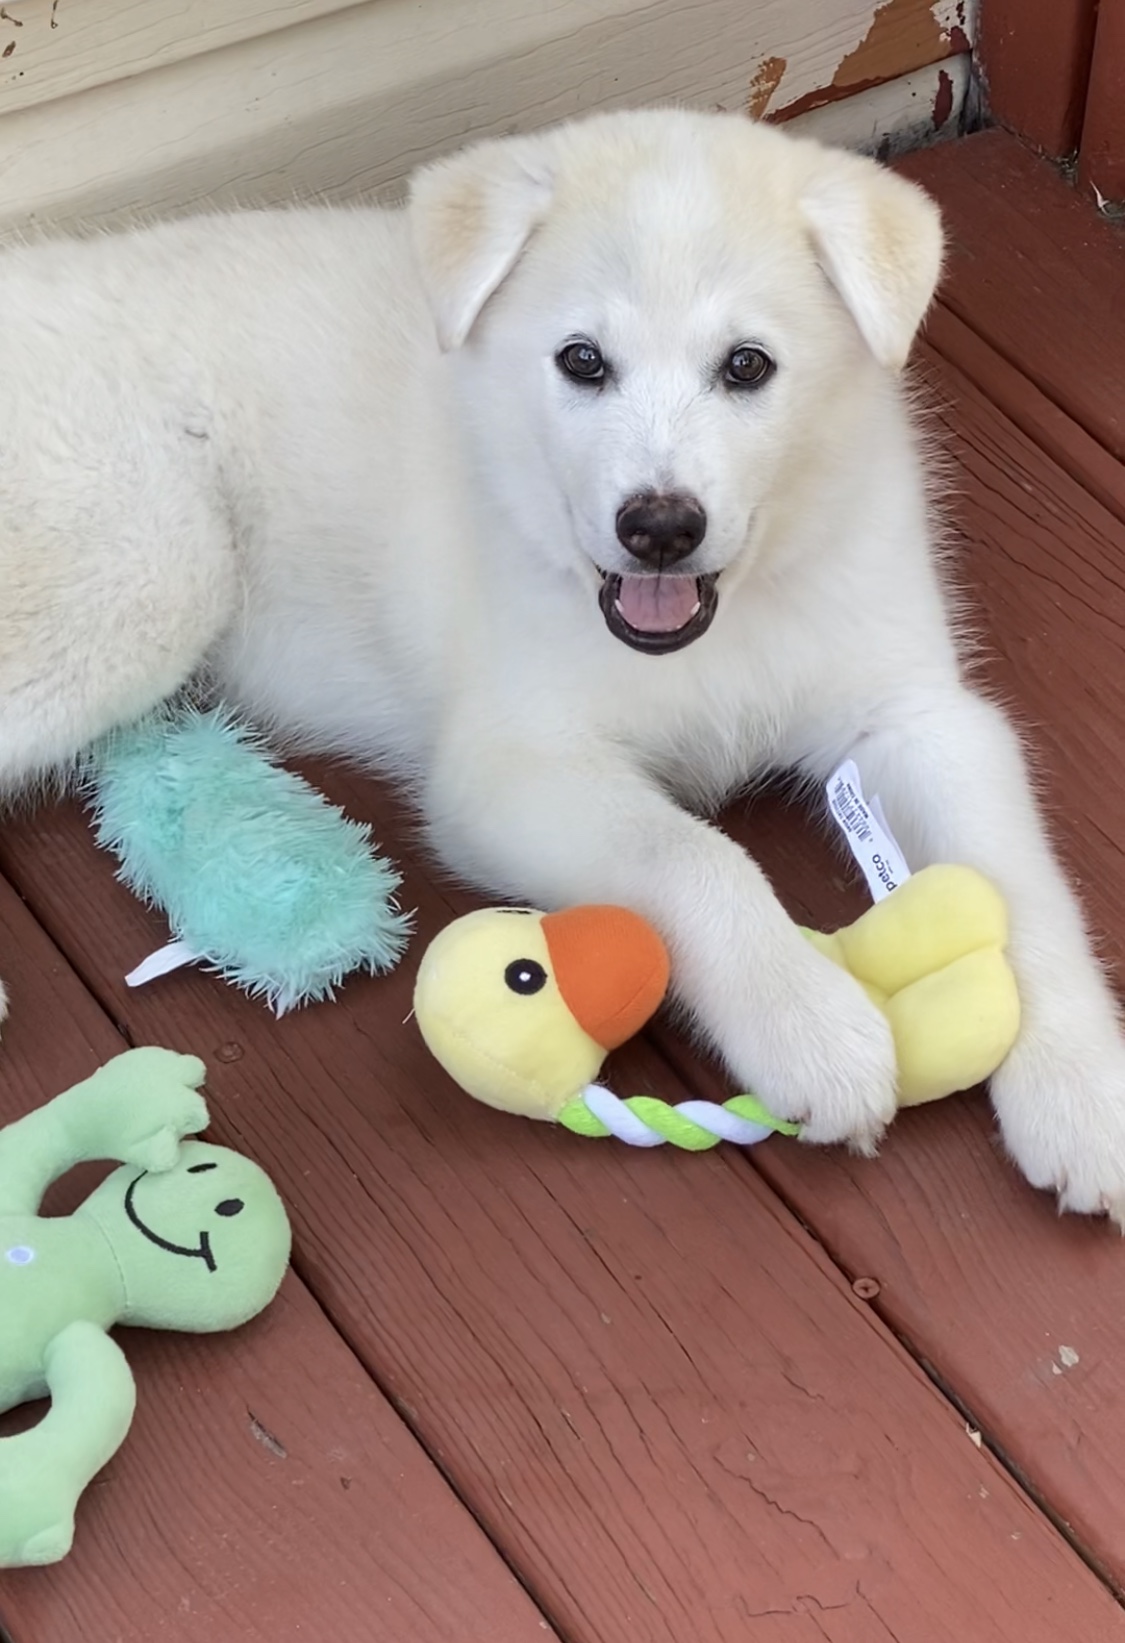 10 Week Male Husky Mixed Breed Puppy For Sale in Queens NY - photo 2